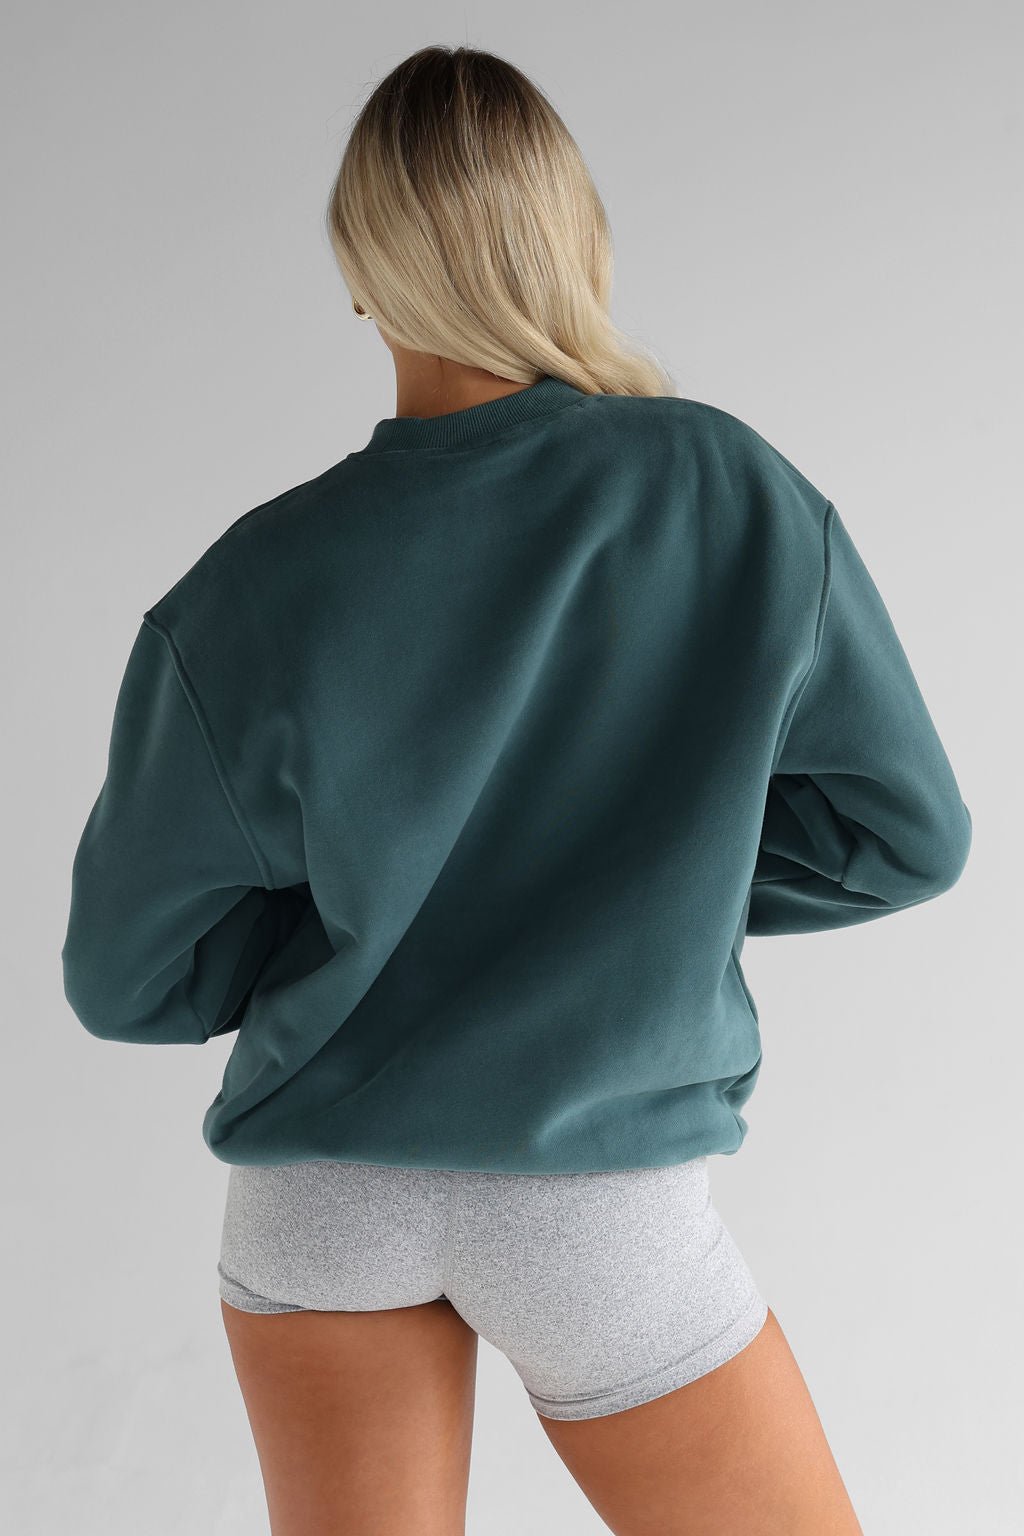 Signature Sweater - Vintage Green - LEELO ACTIVE